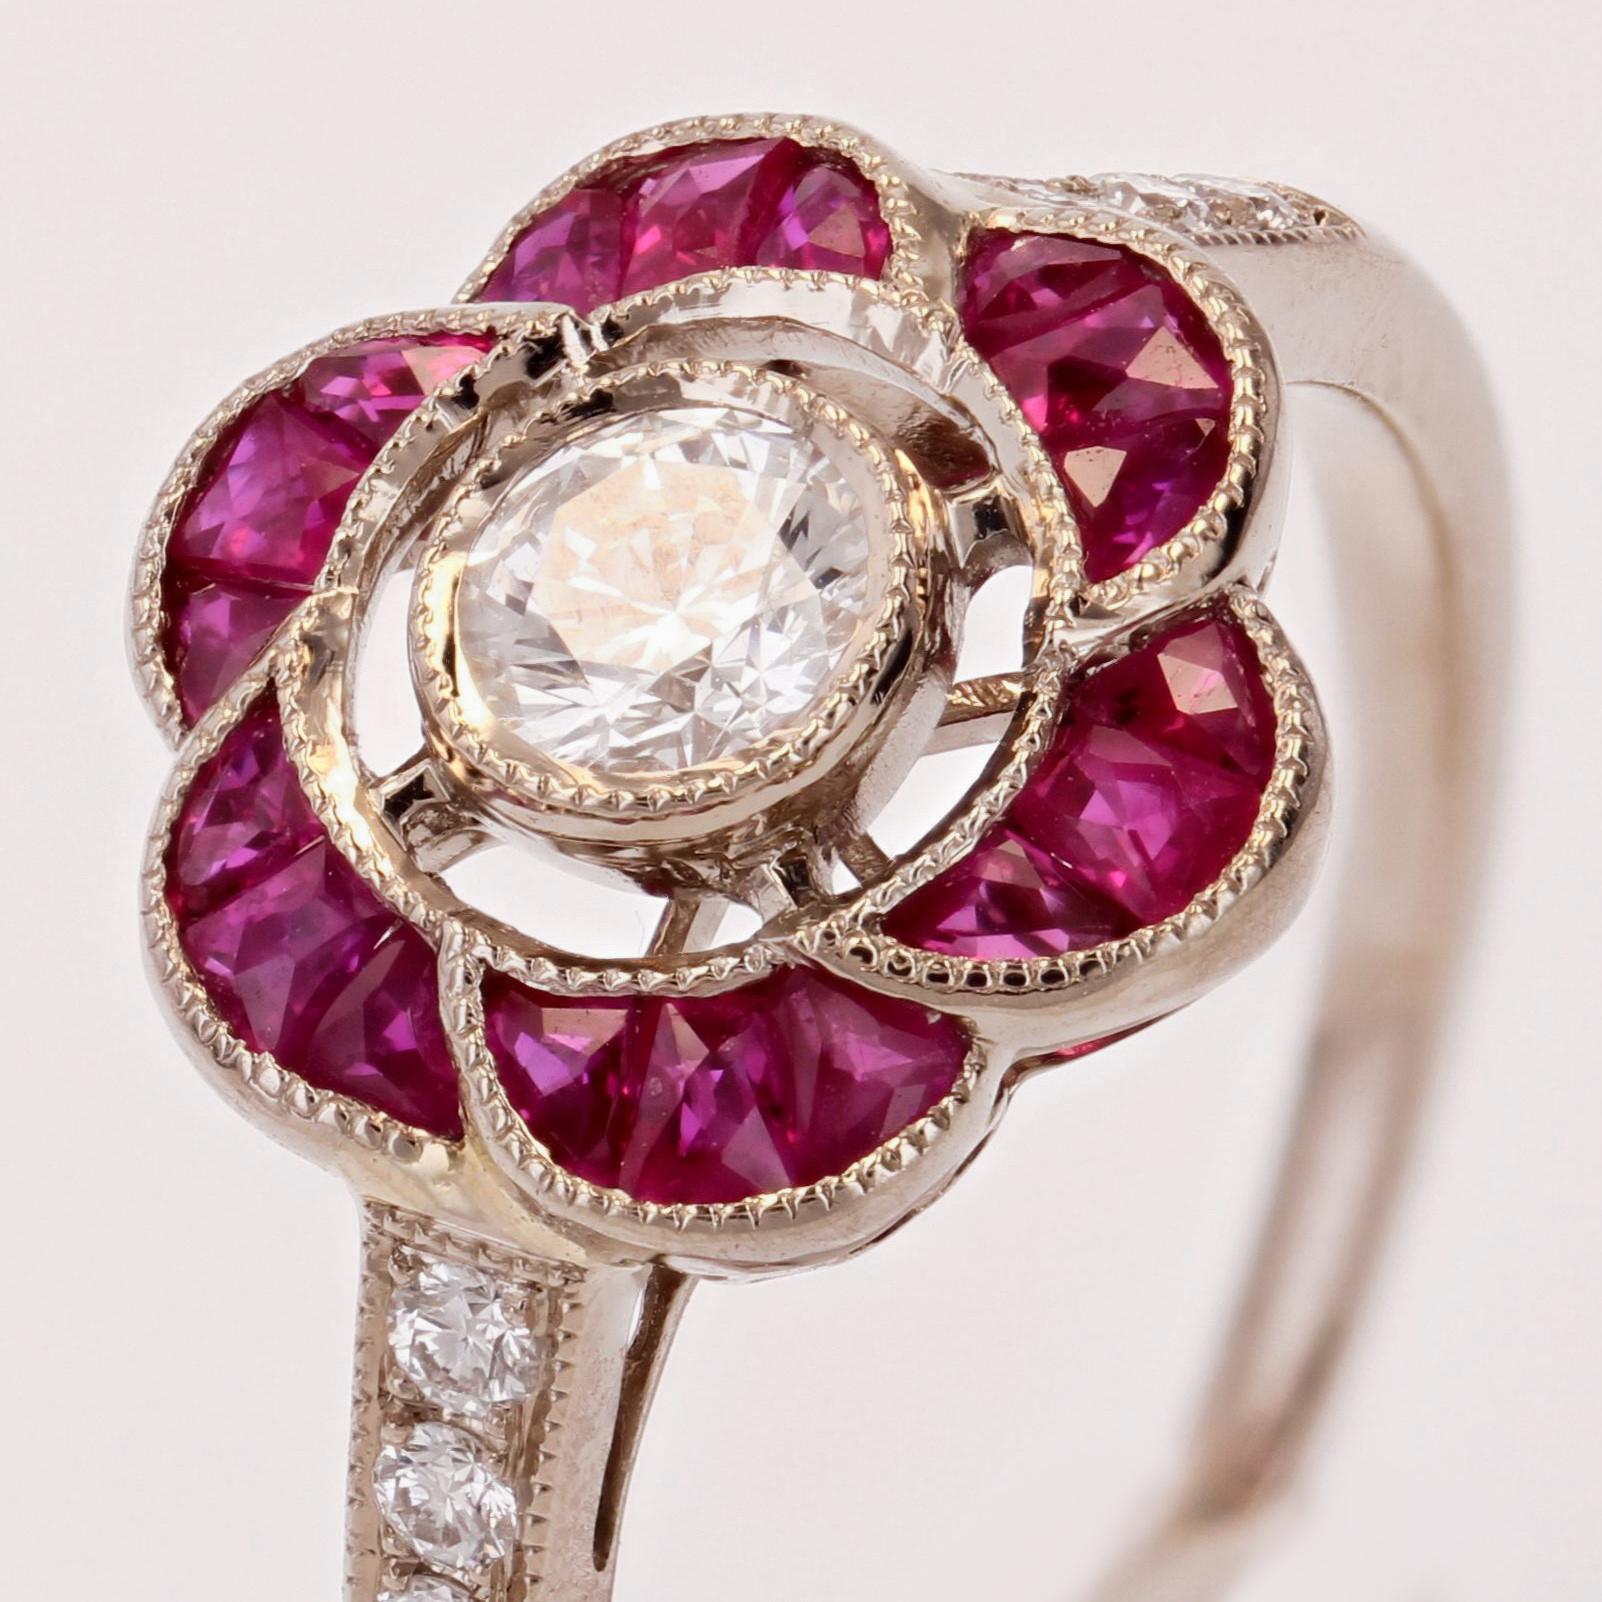 New Art Deco Style Calibrated Rubies Diamonds 18 Karat White Gold Flower Ring For Sale 4